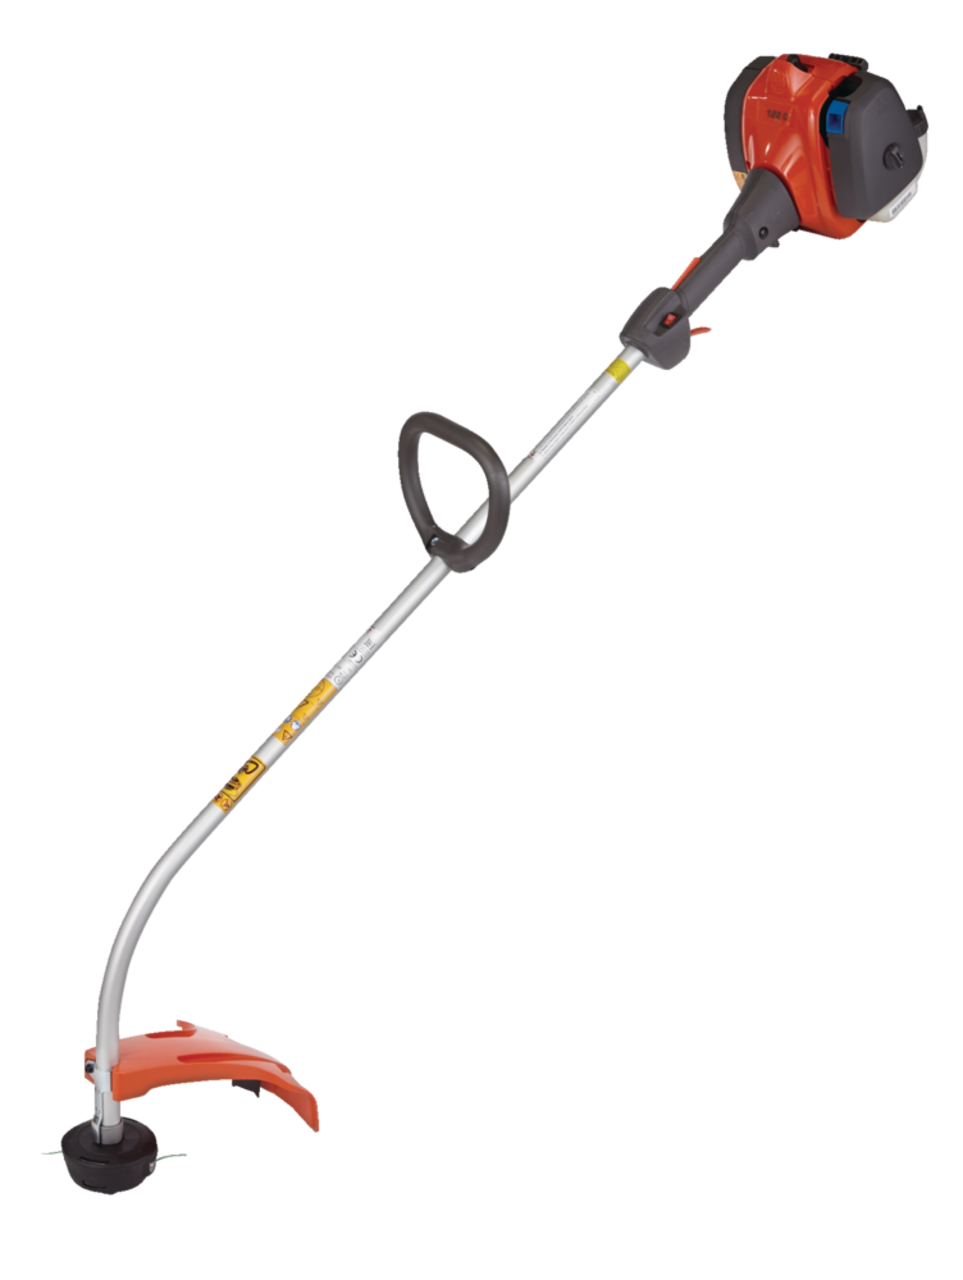 https://media-www.canadiantire.ca/product/seasonal-gardening/outdoor-tools/hand-held-outdoor-power-tools/0602347/husqvarna-22cc-curved-shaft-grass-trimmer-16-in-de2a3be1-3d90-4df0-8f76-3bb66843018f.png?imdensity=1&imwidth=1244&impolicy=mZoom